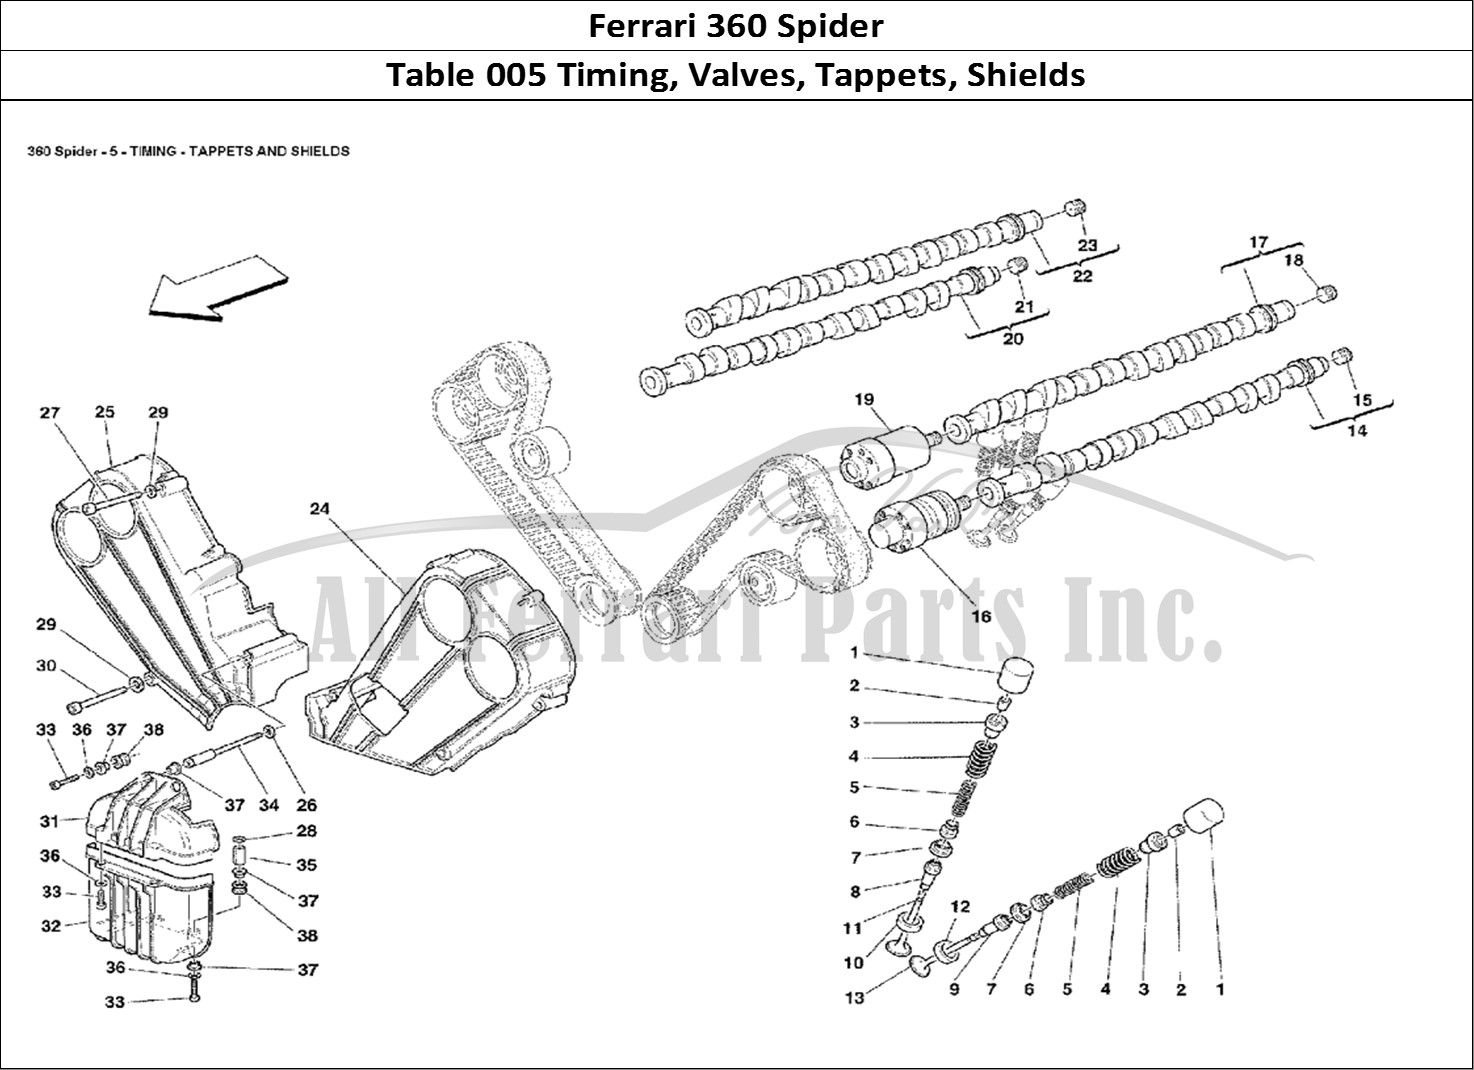 Ferrari Parts Ferrari 360 Spider Page 005 Timing - Tappets and Shie